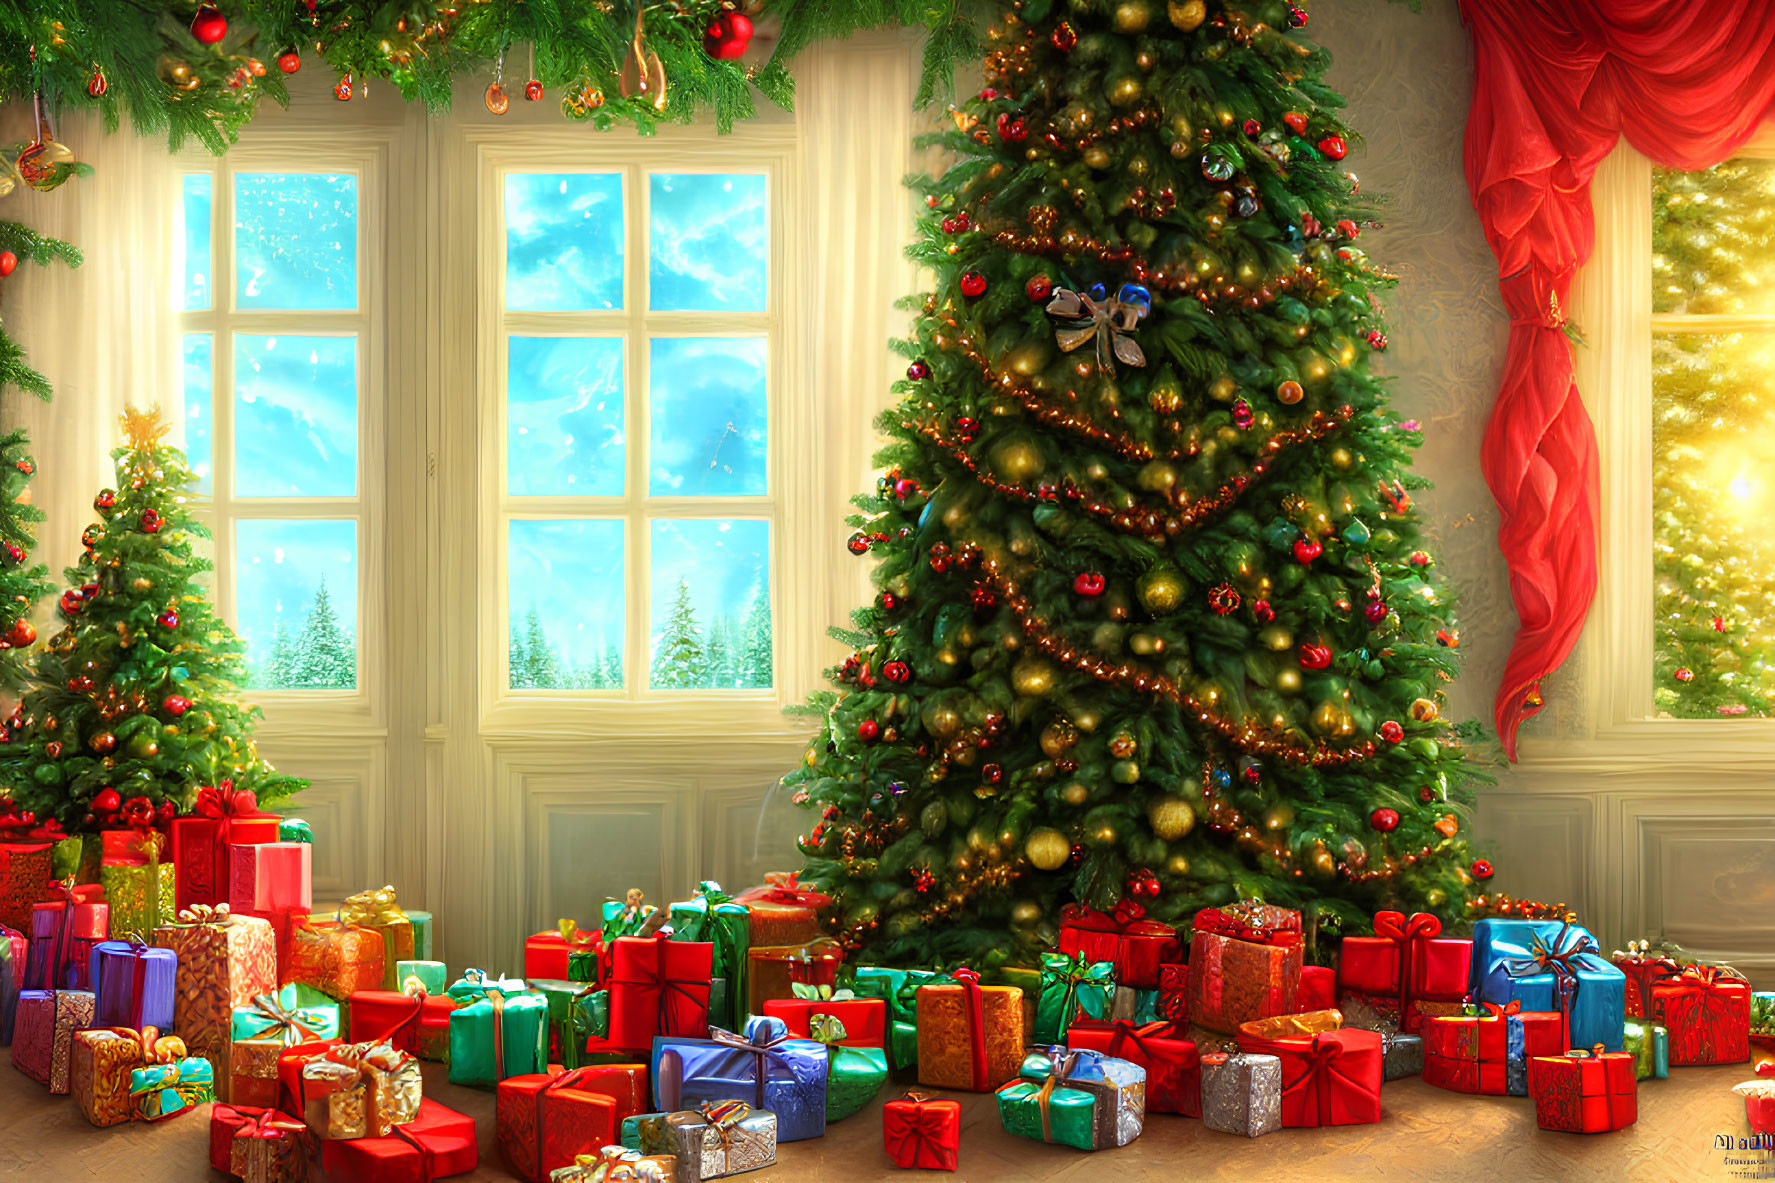 Festive room with large Christmas tree and colorful gifts beside snowy window